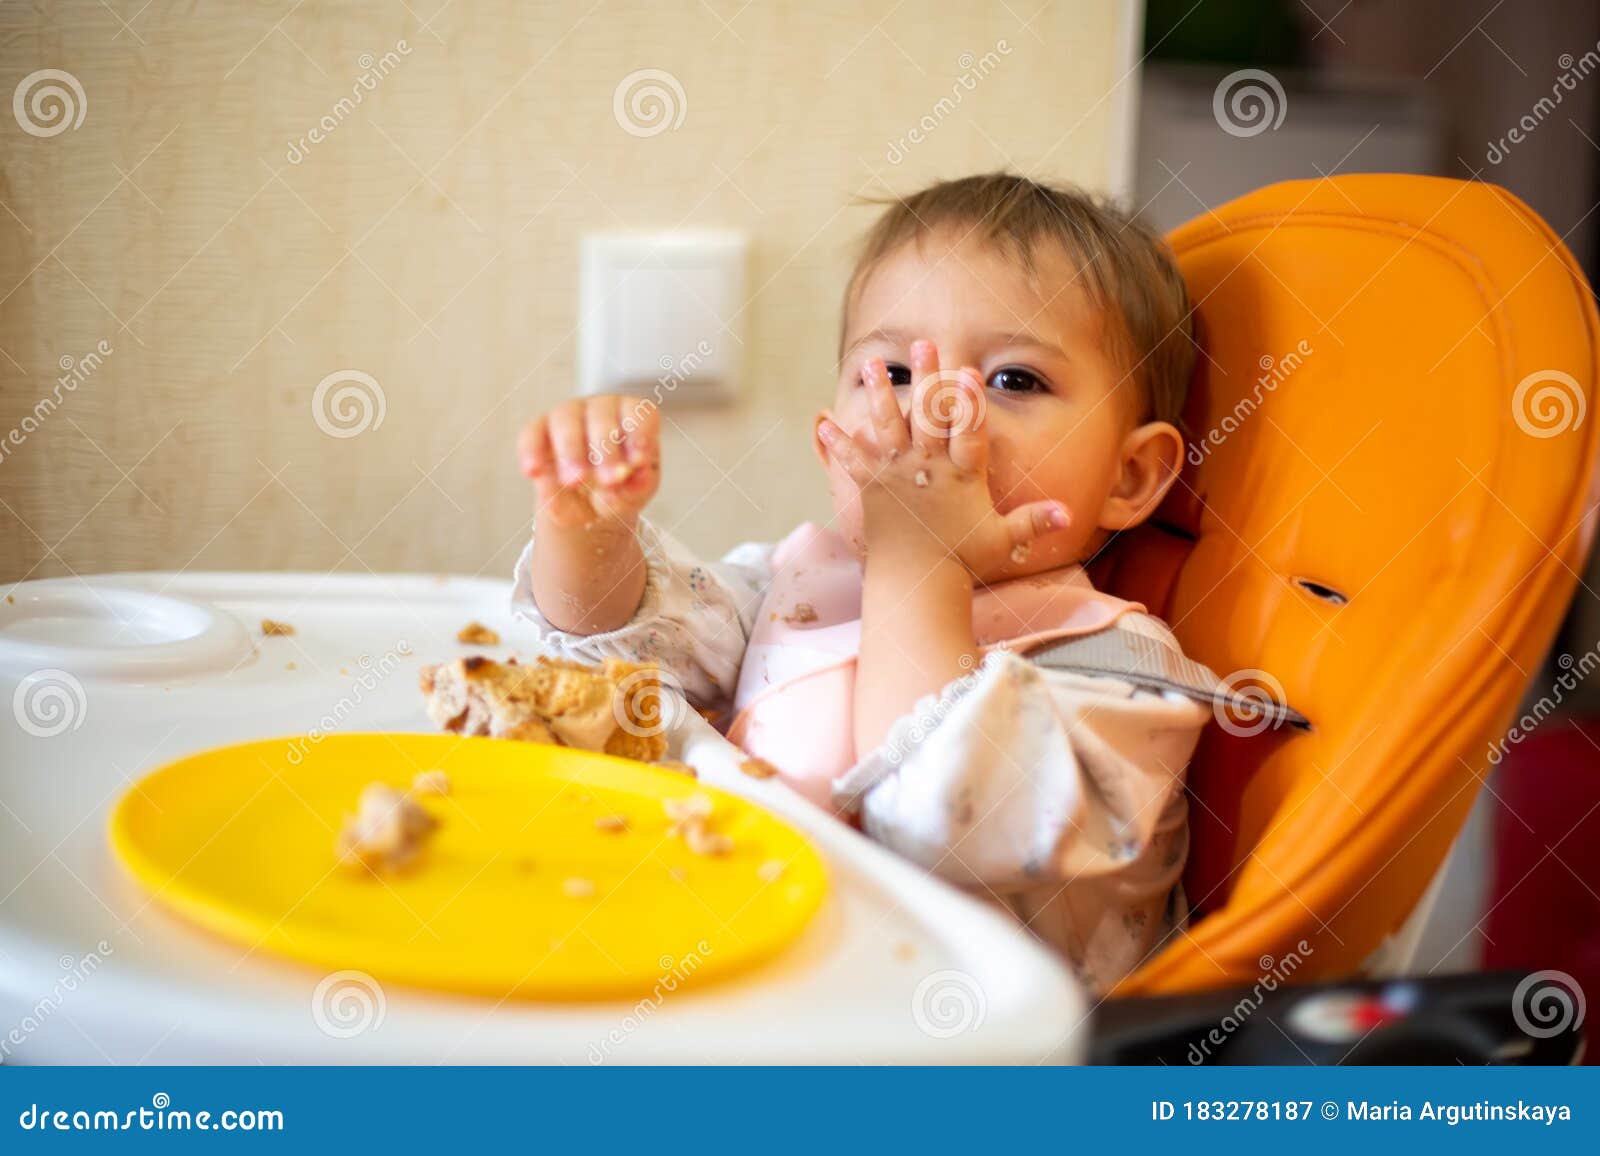 Cute Baby Sits In An Orange Baby Chair With A Table With ...